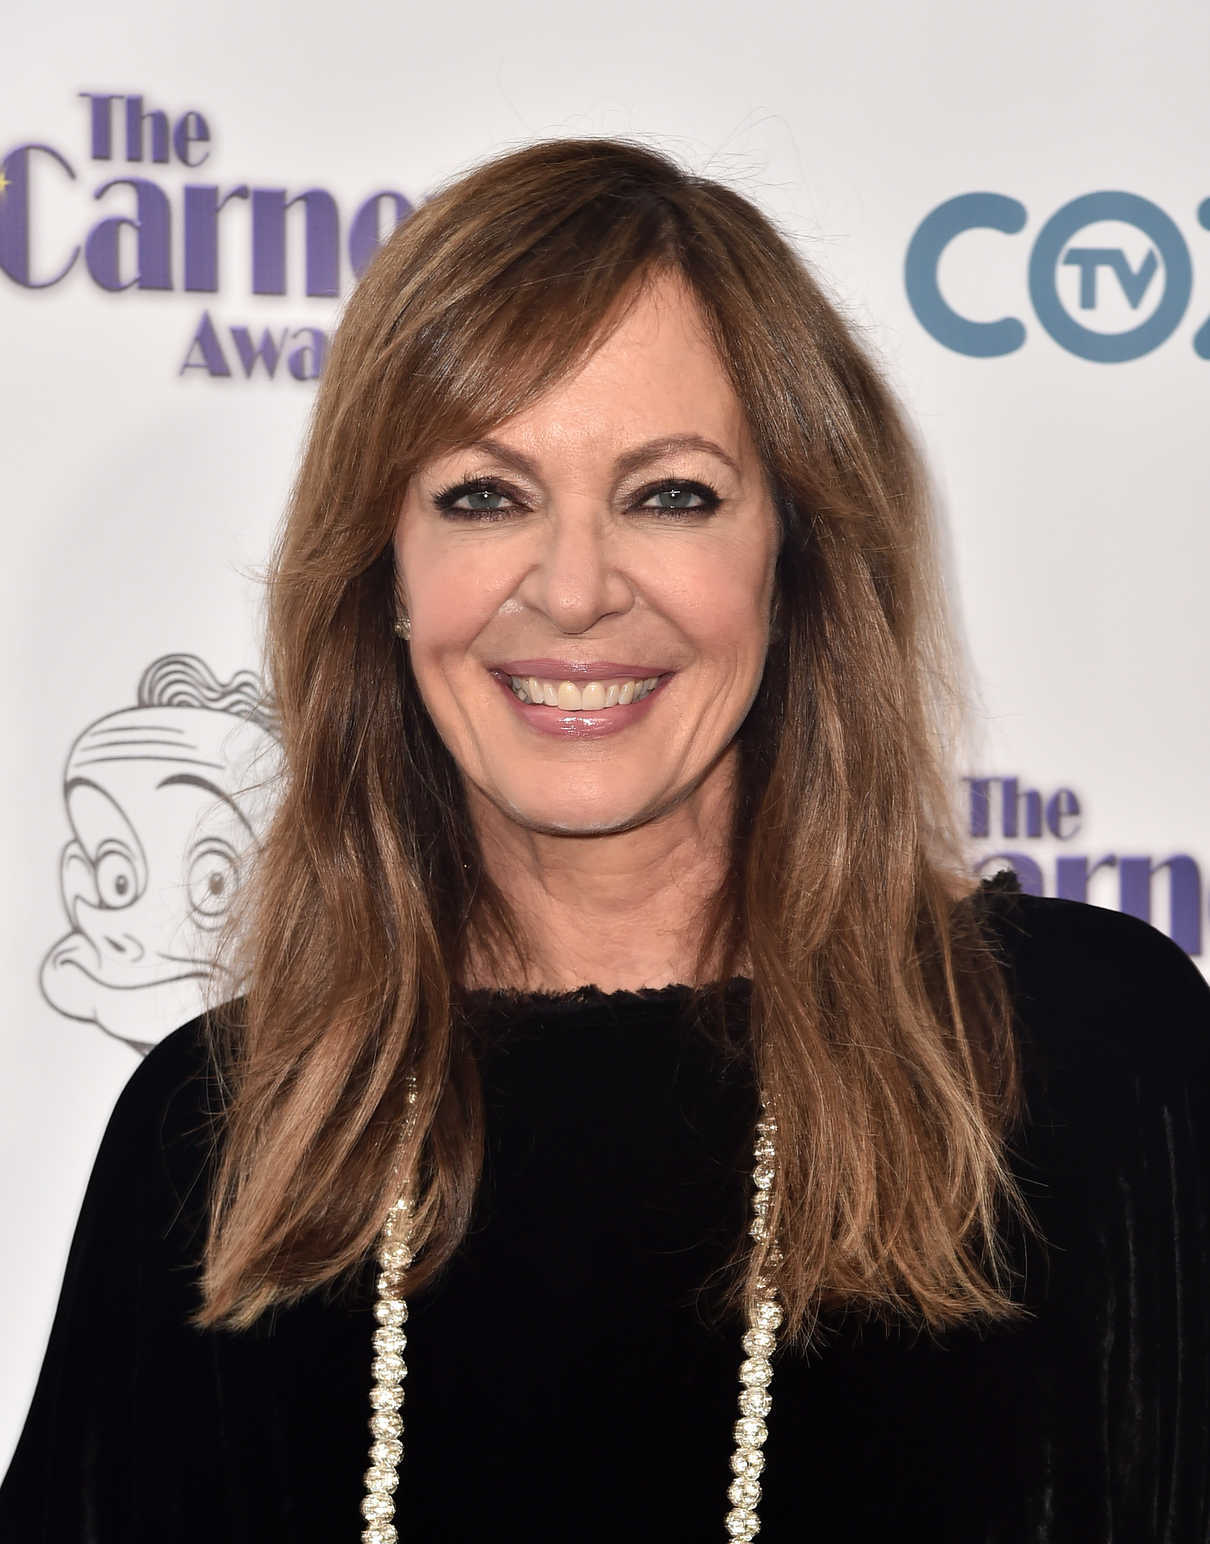 Allison Janney at the 3rd Annual Carney Awards in Santa Monica 10/29/2017-5